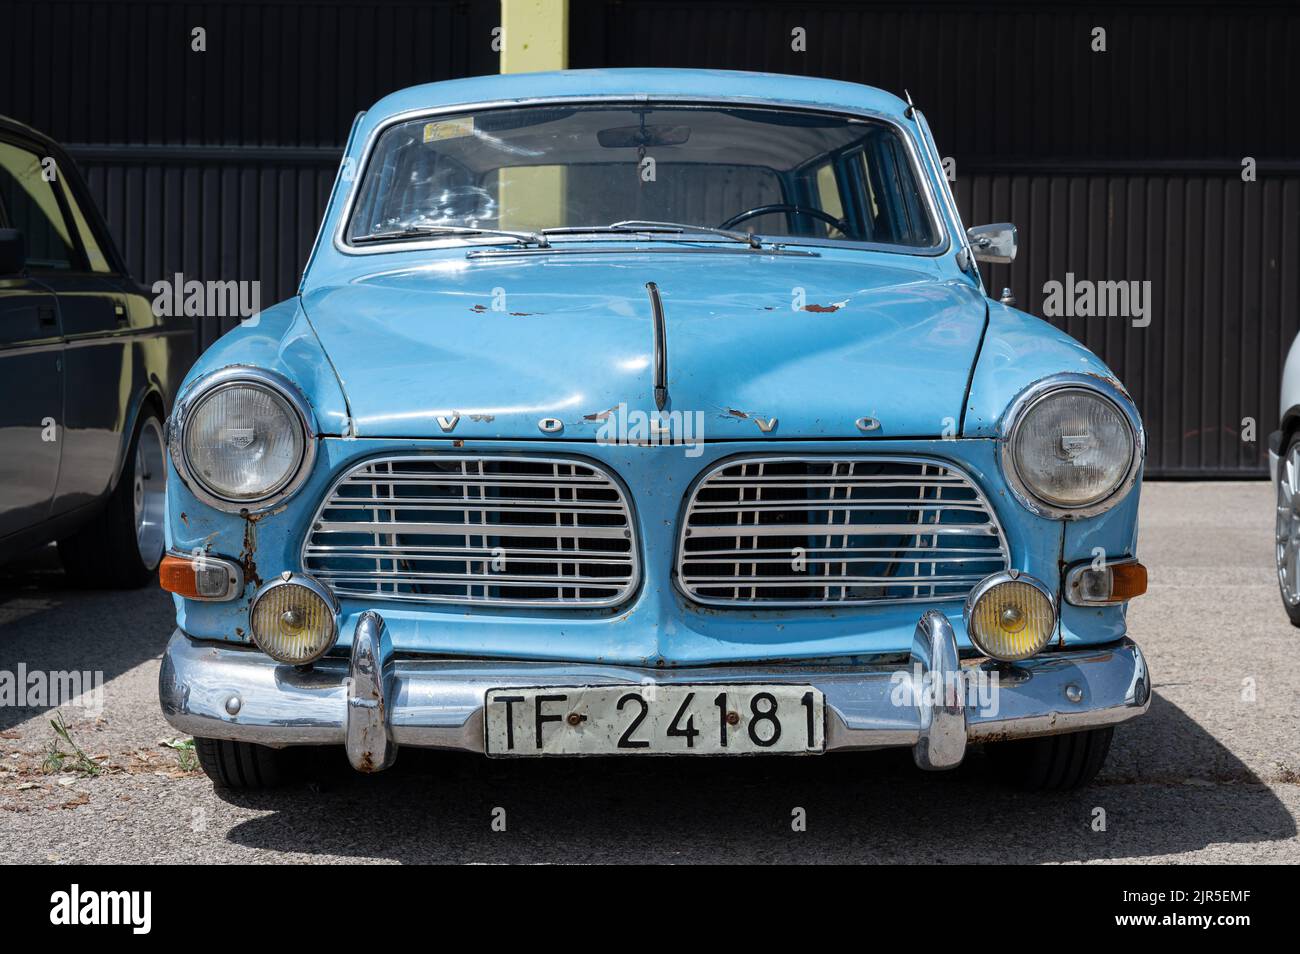 A blue classic Volvo Amazon car parked on the street Stock Photo